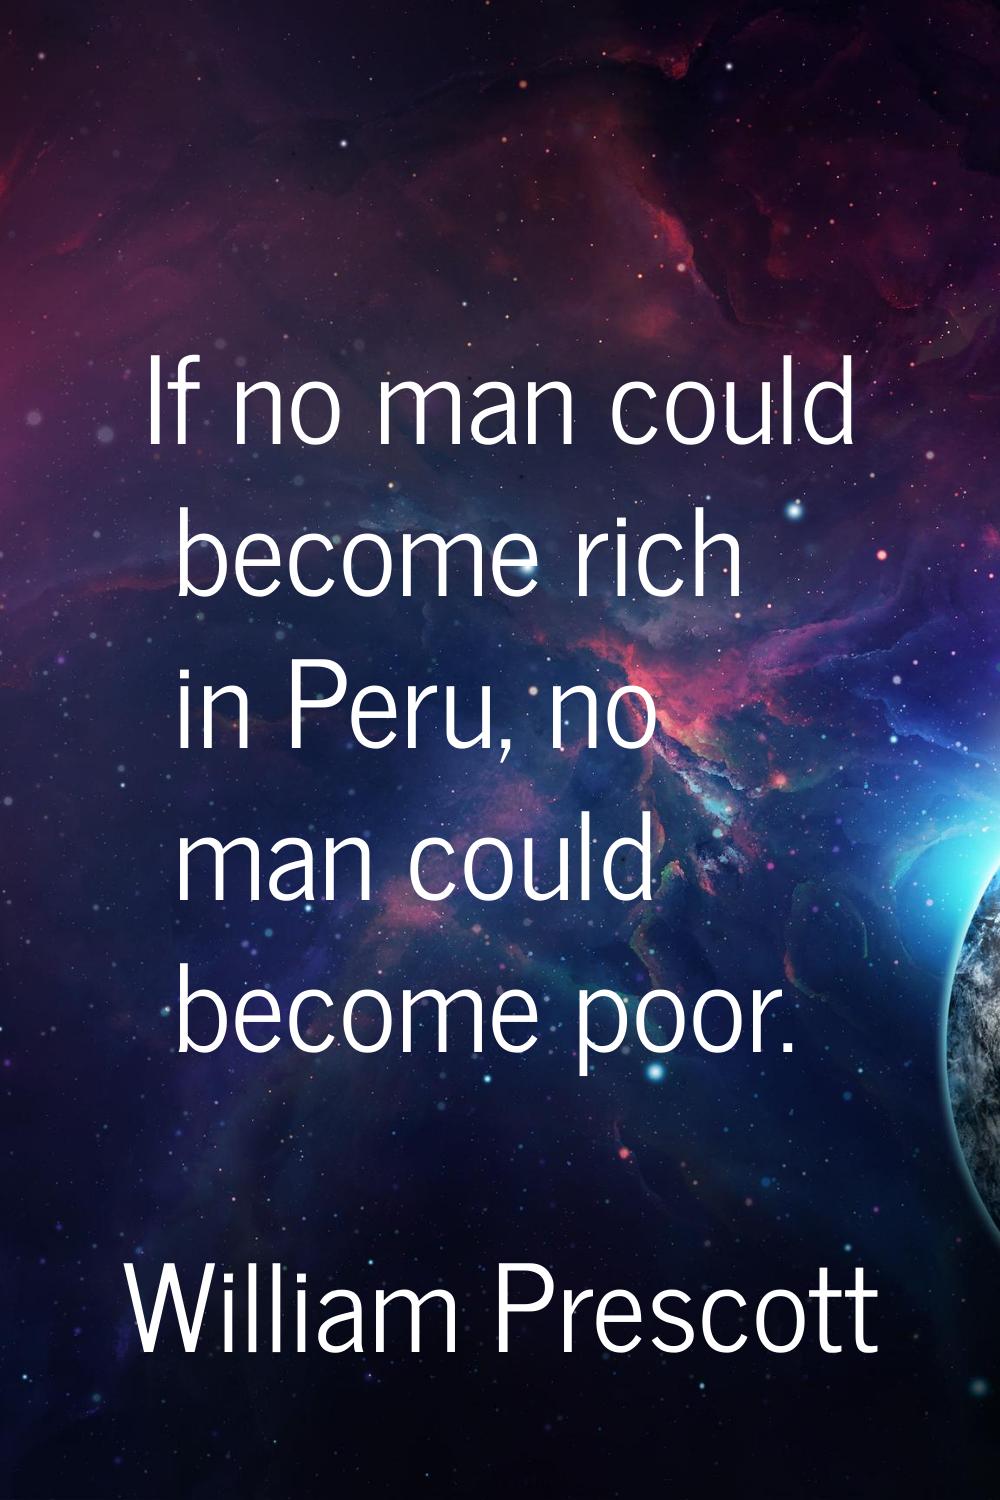 If no man could become rich in Peru, no man could become poor.